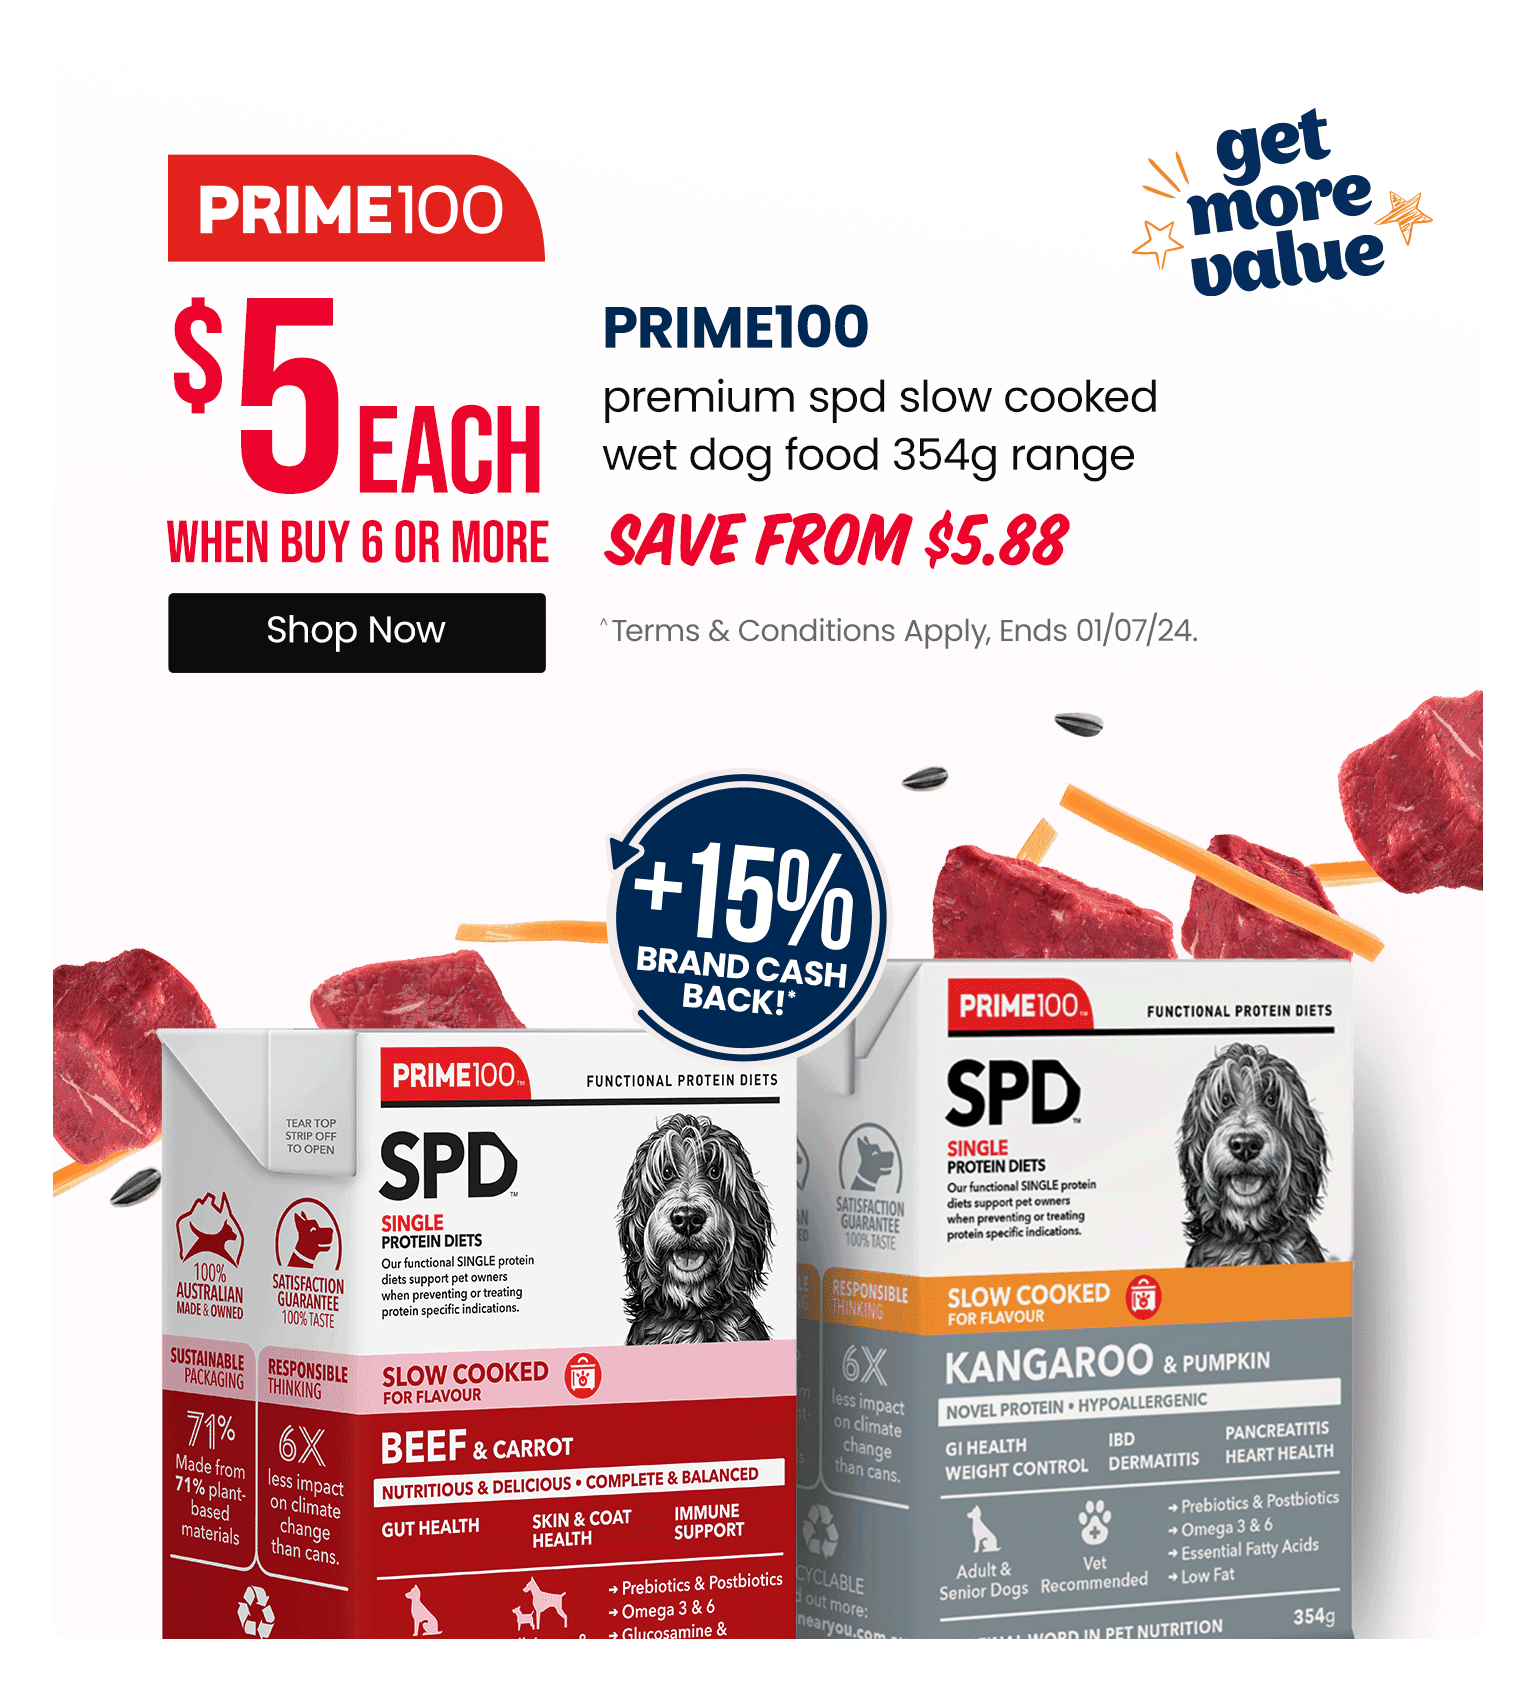 $5 EACH Prime100 premium SPD slow cooked WHEN YOU BUY 6 OR MORE